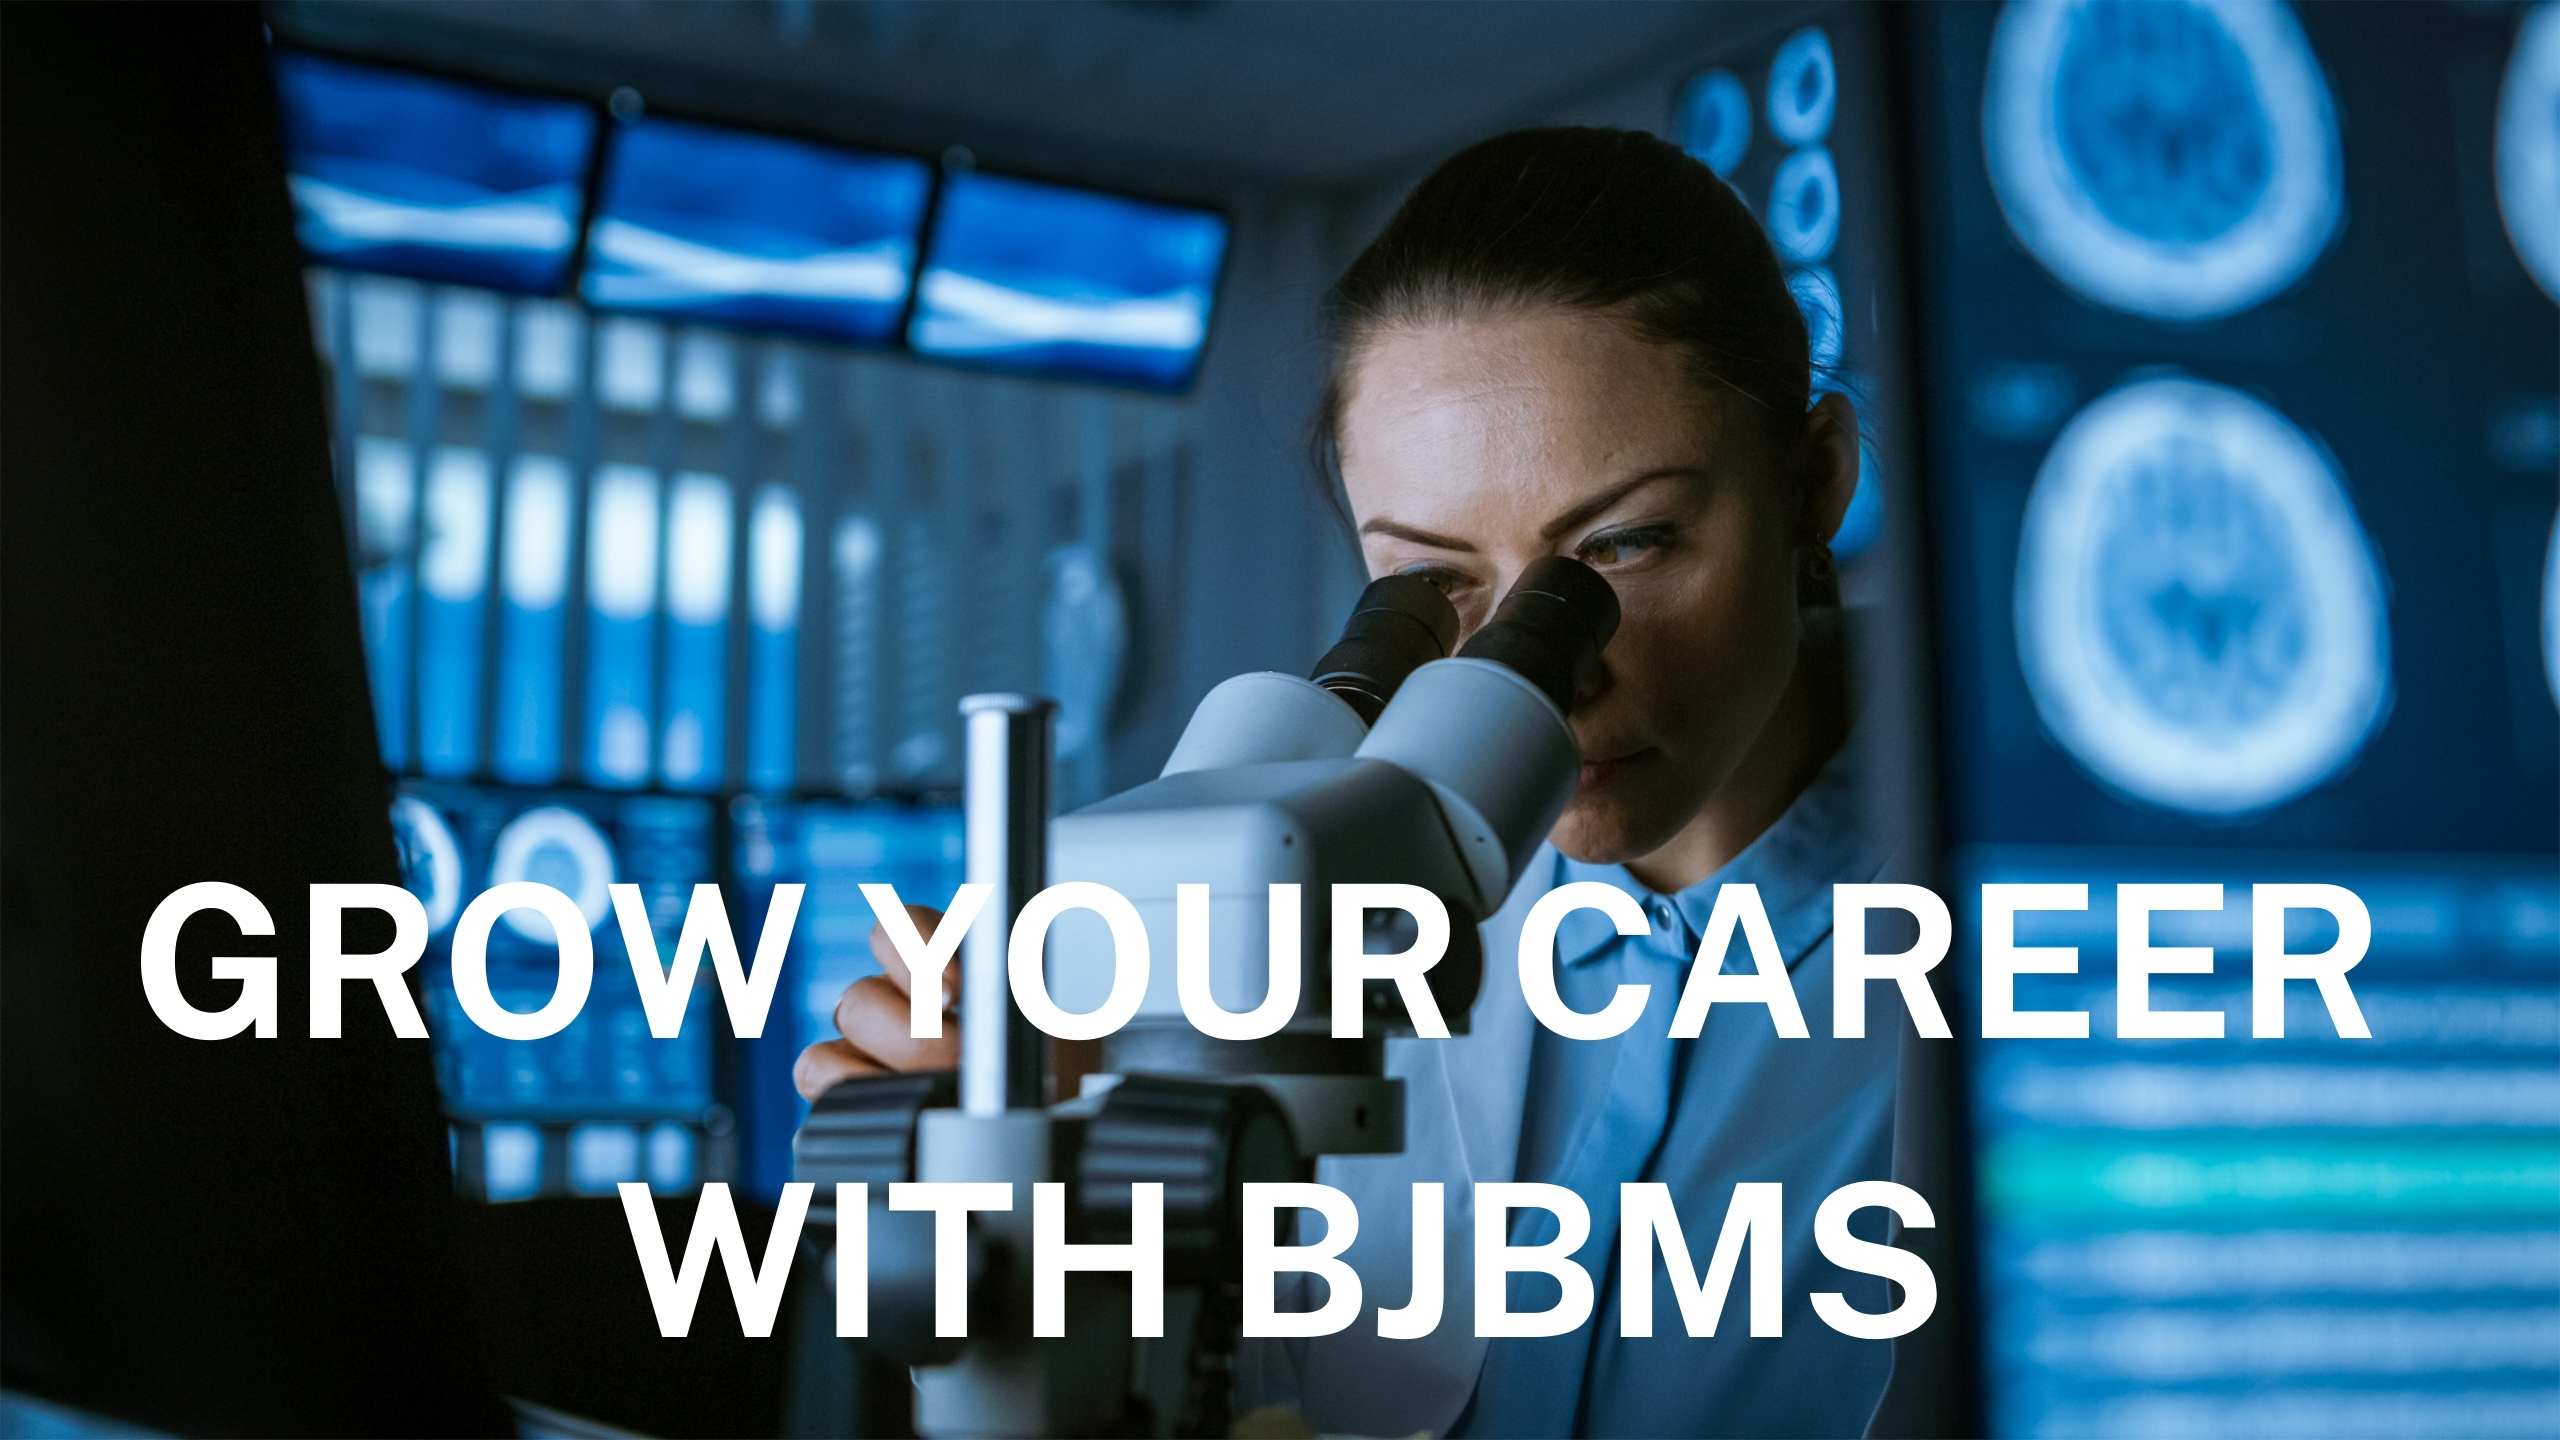 Grow your career with BJBMS (1)